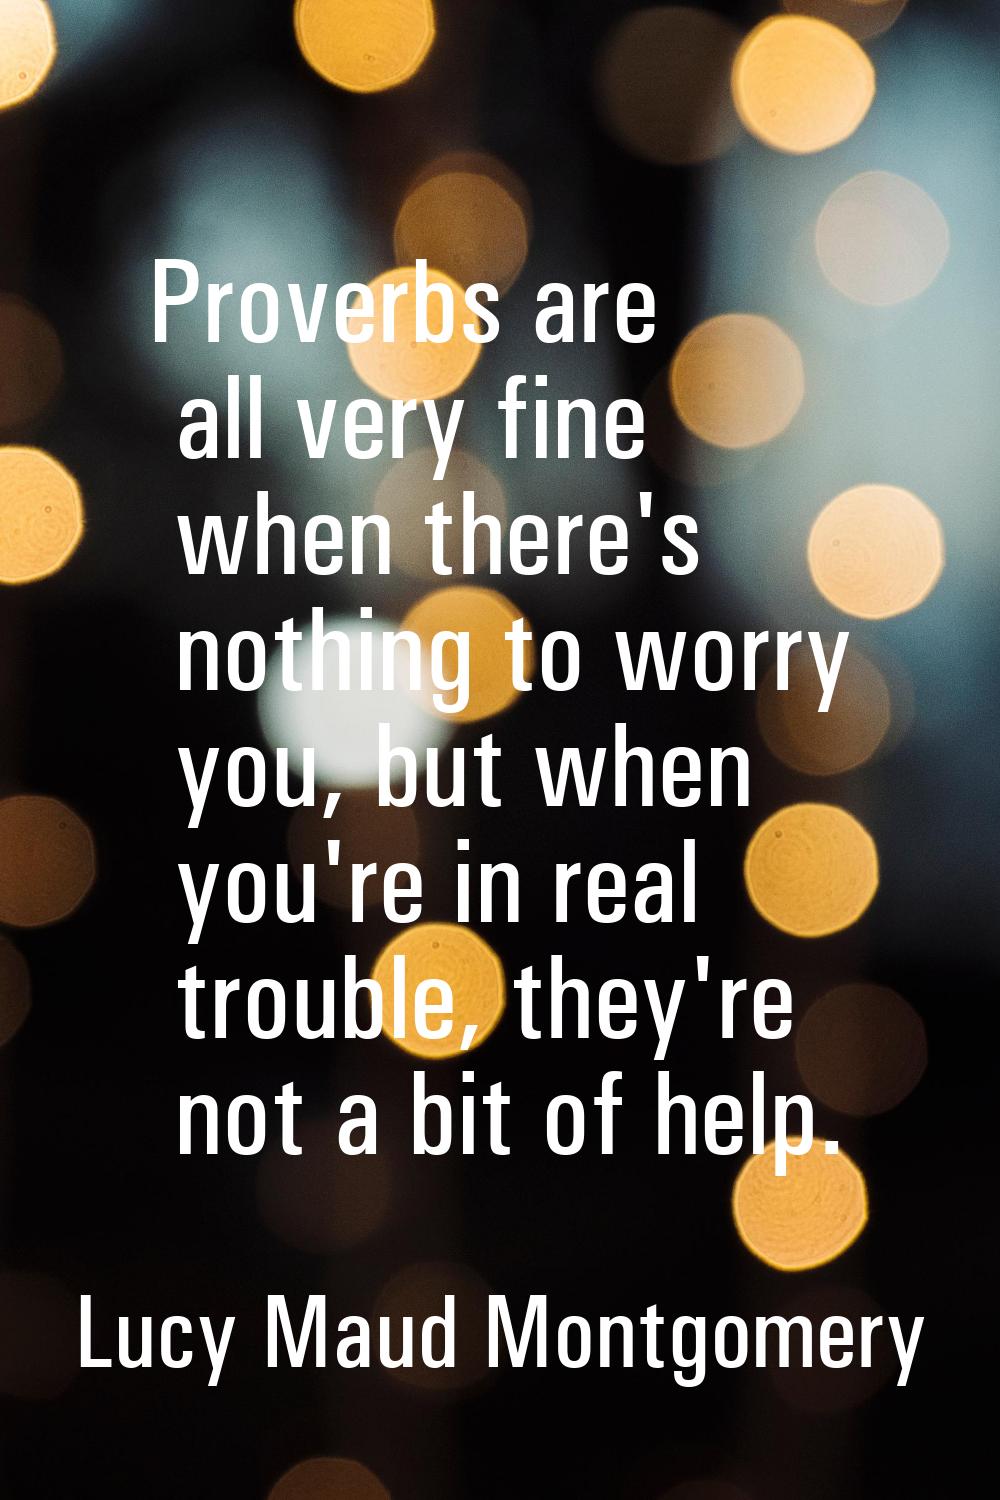 Proverbs are all very fine when there's nothing to worry you, but when you're in real trouble, they